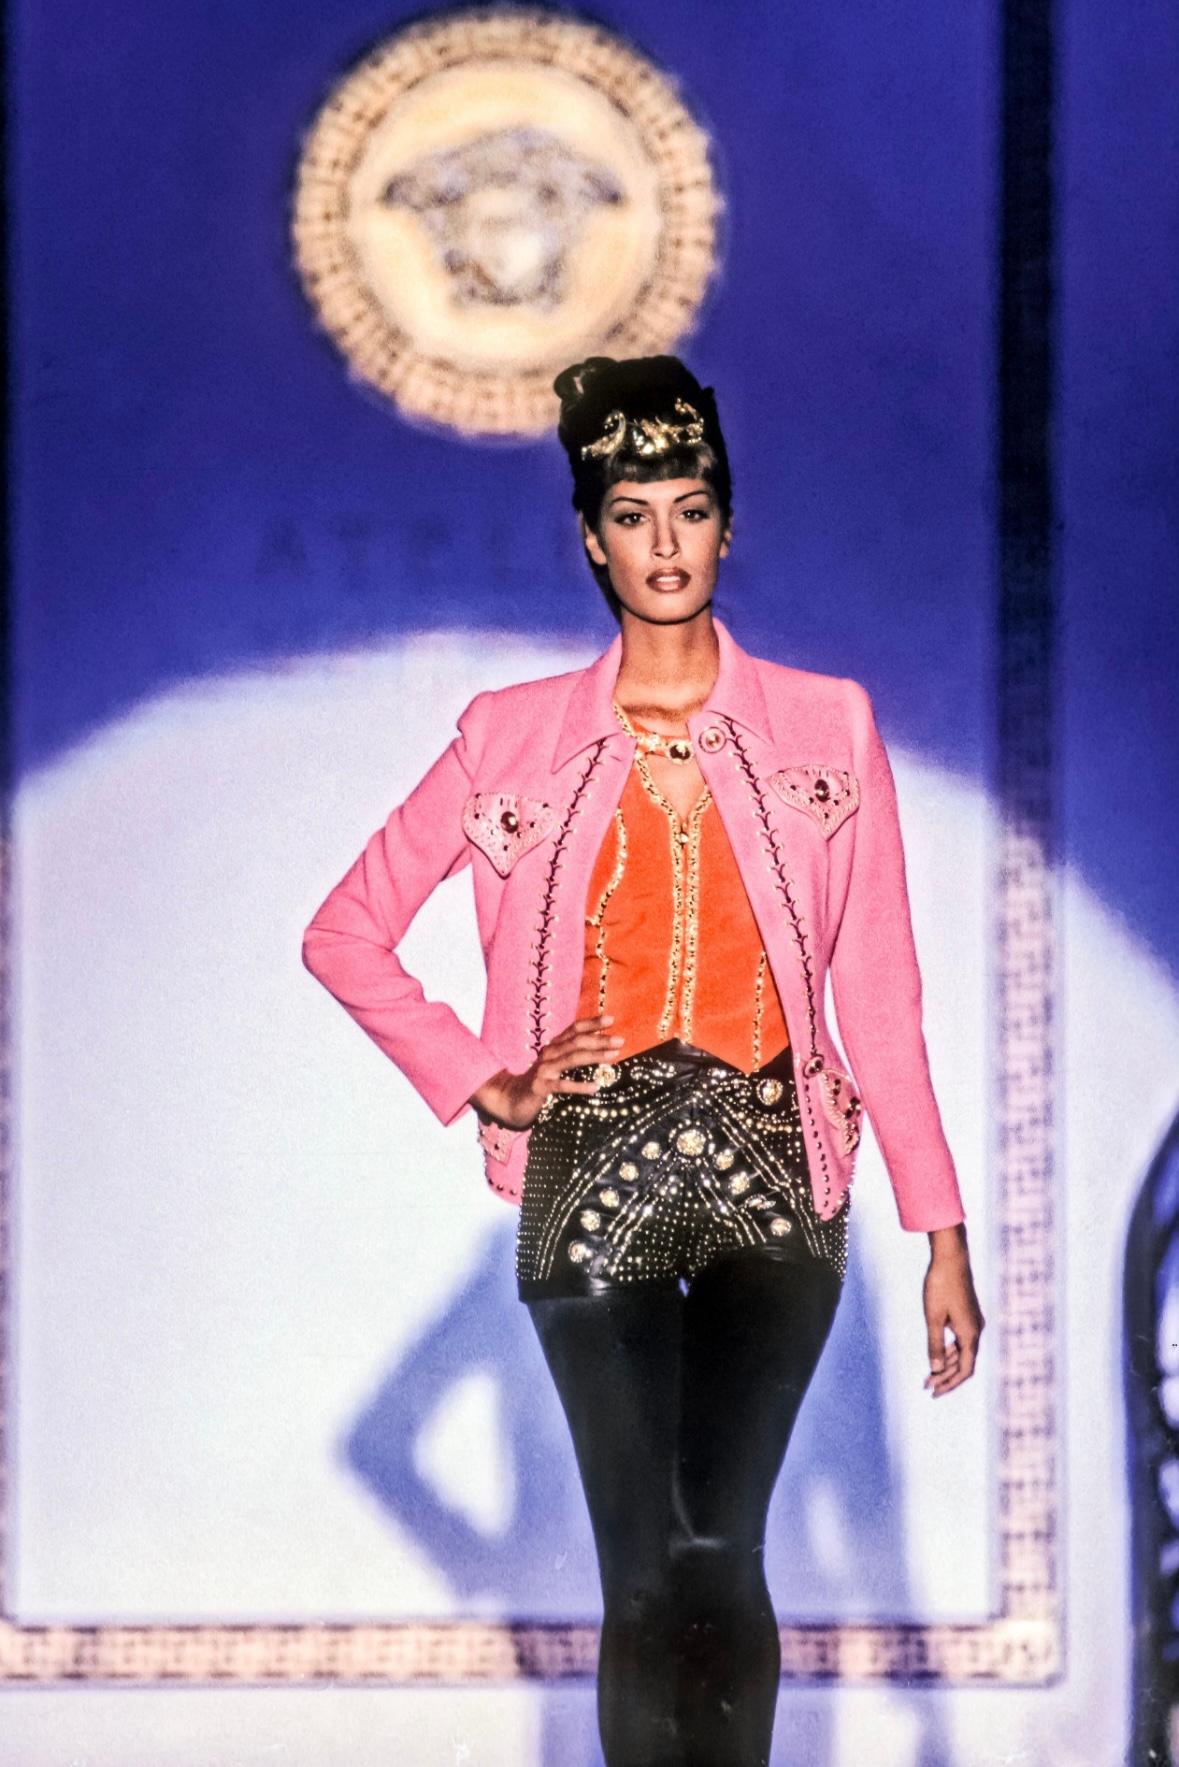 Presenting an incredible pair of black studded Atelier Versace mini shorts, designed by Gianni Versace. From the Fall/Winter 1992 'Miss S&M' season, these mini high-waisted shorts debuted on the season's couture runway on Yasmeen Ghauri. These